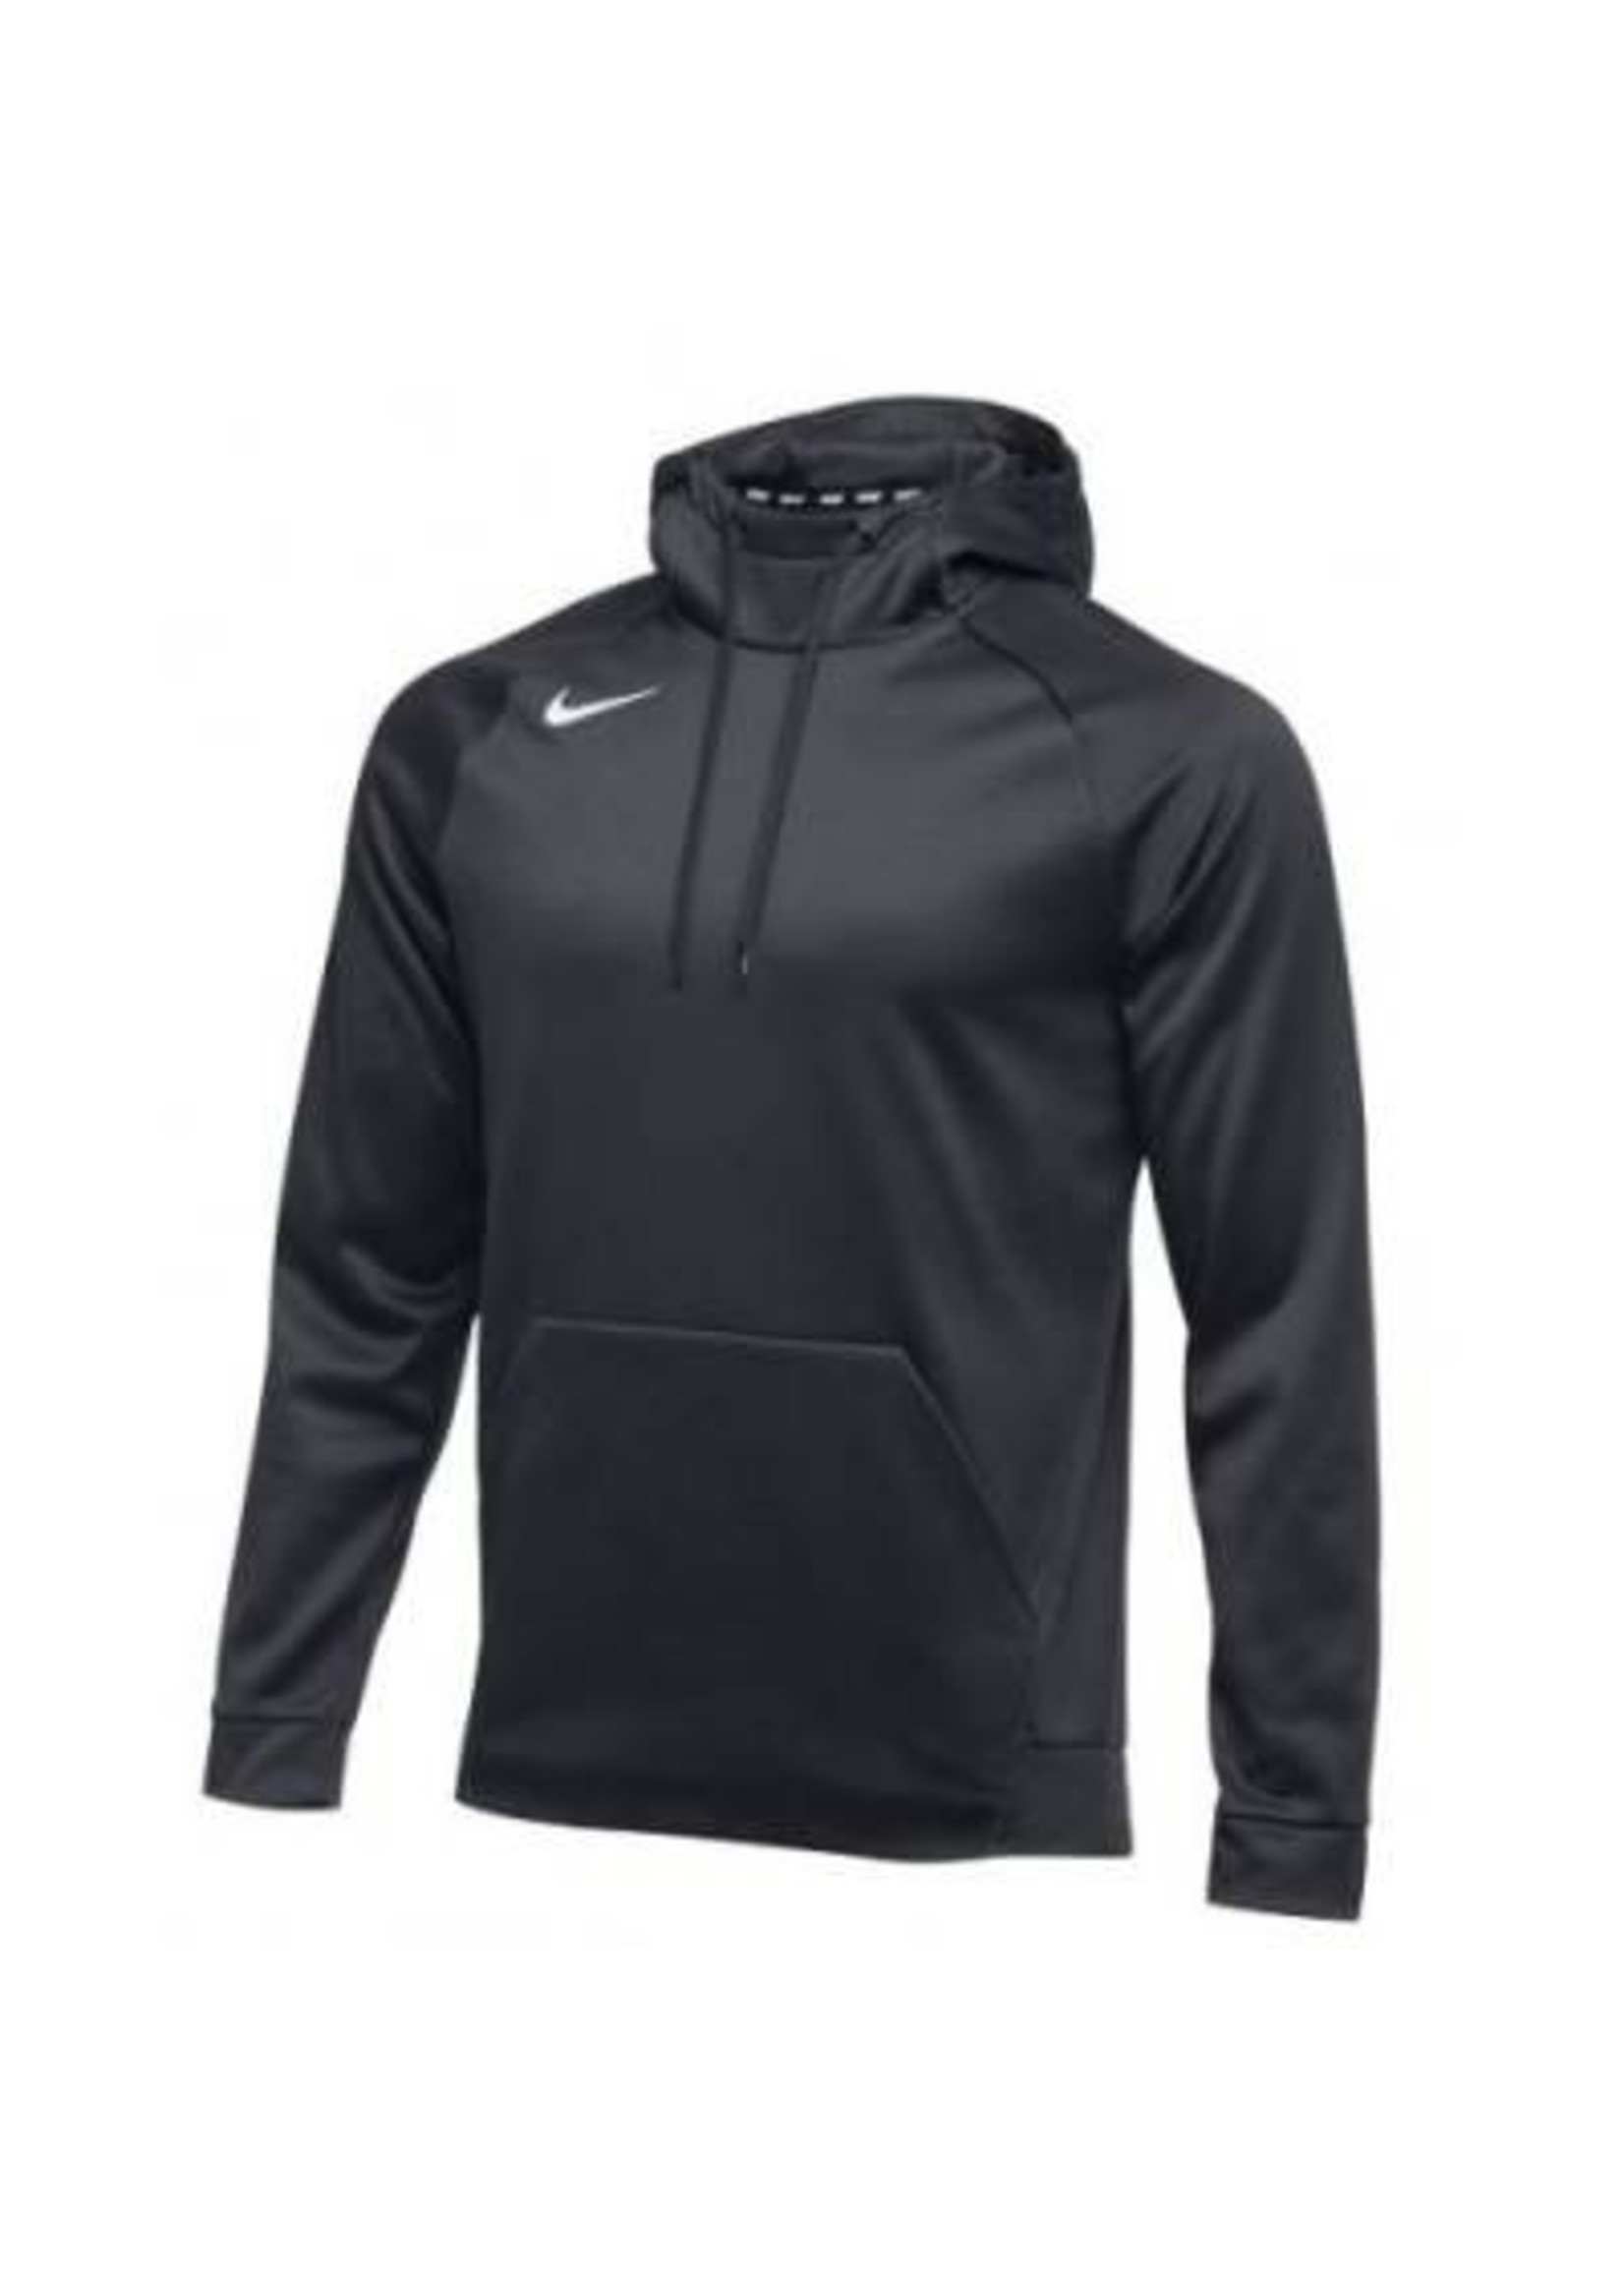 NON-UNIFORM Custom Nike Hooded Performance Pullover - Adult Sizes